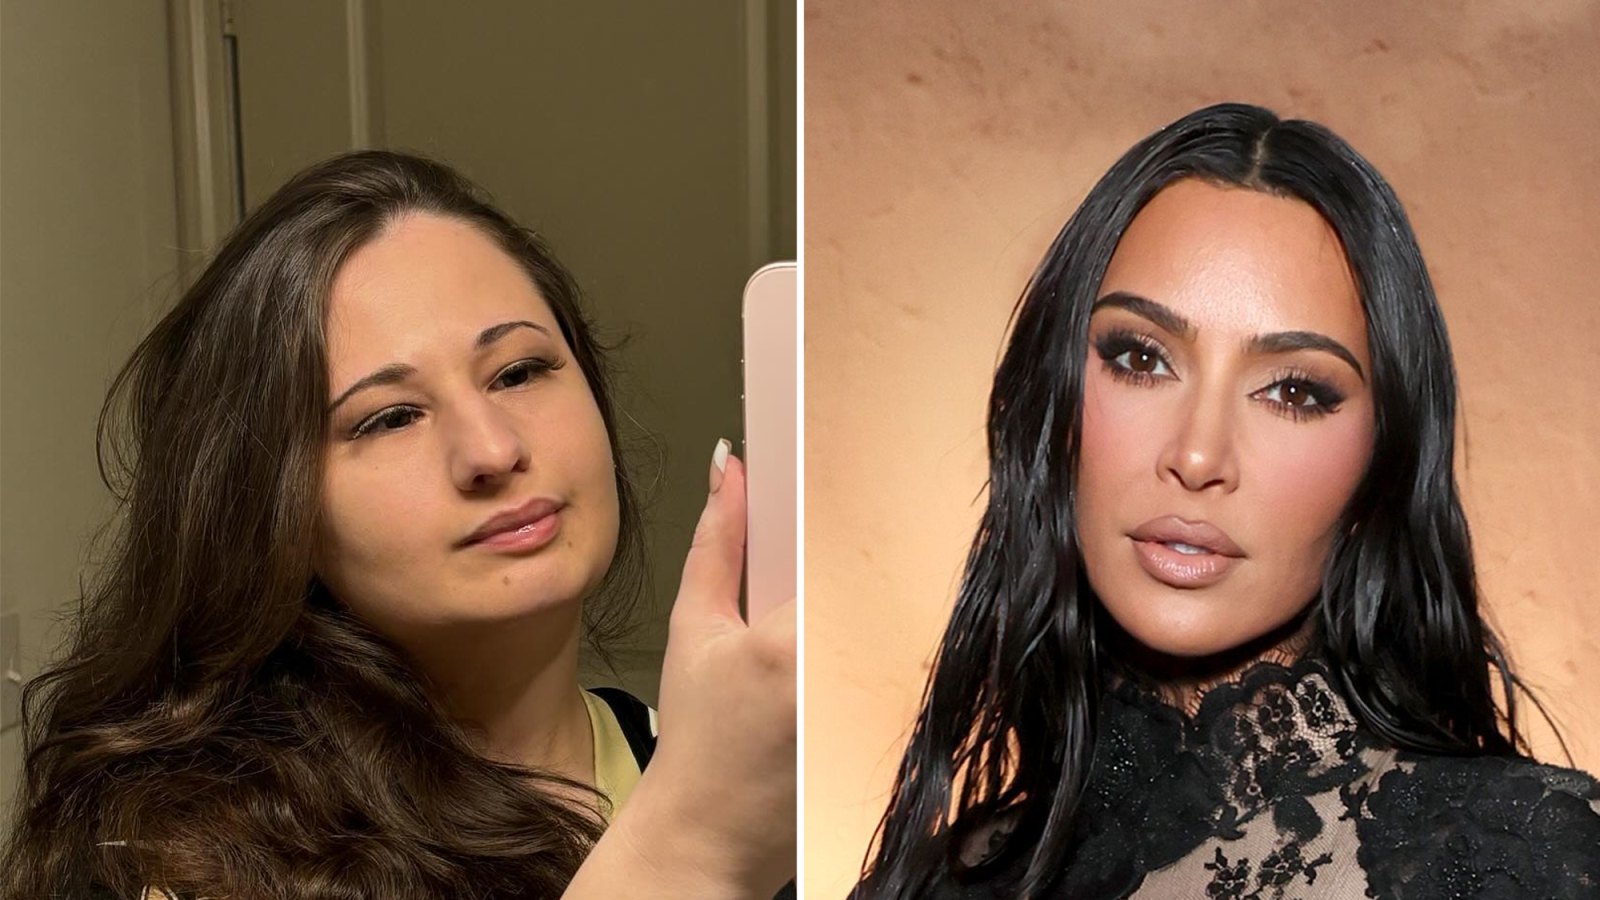 Gypsy Rose Blanchard Thinks She Could Do Some Good Prison Reform Work With Kim Kardashian